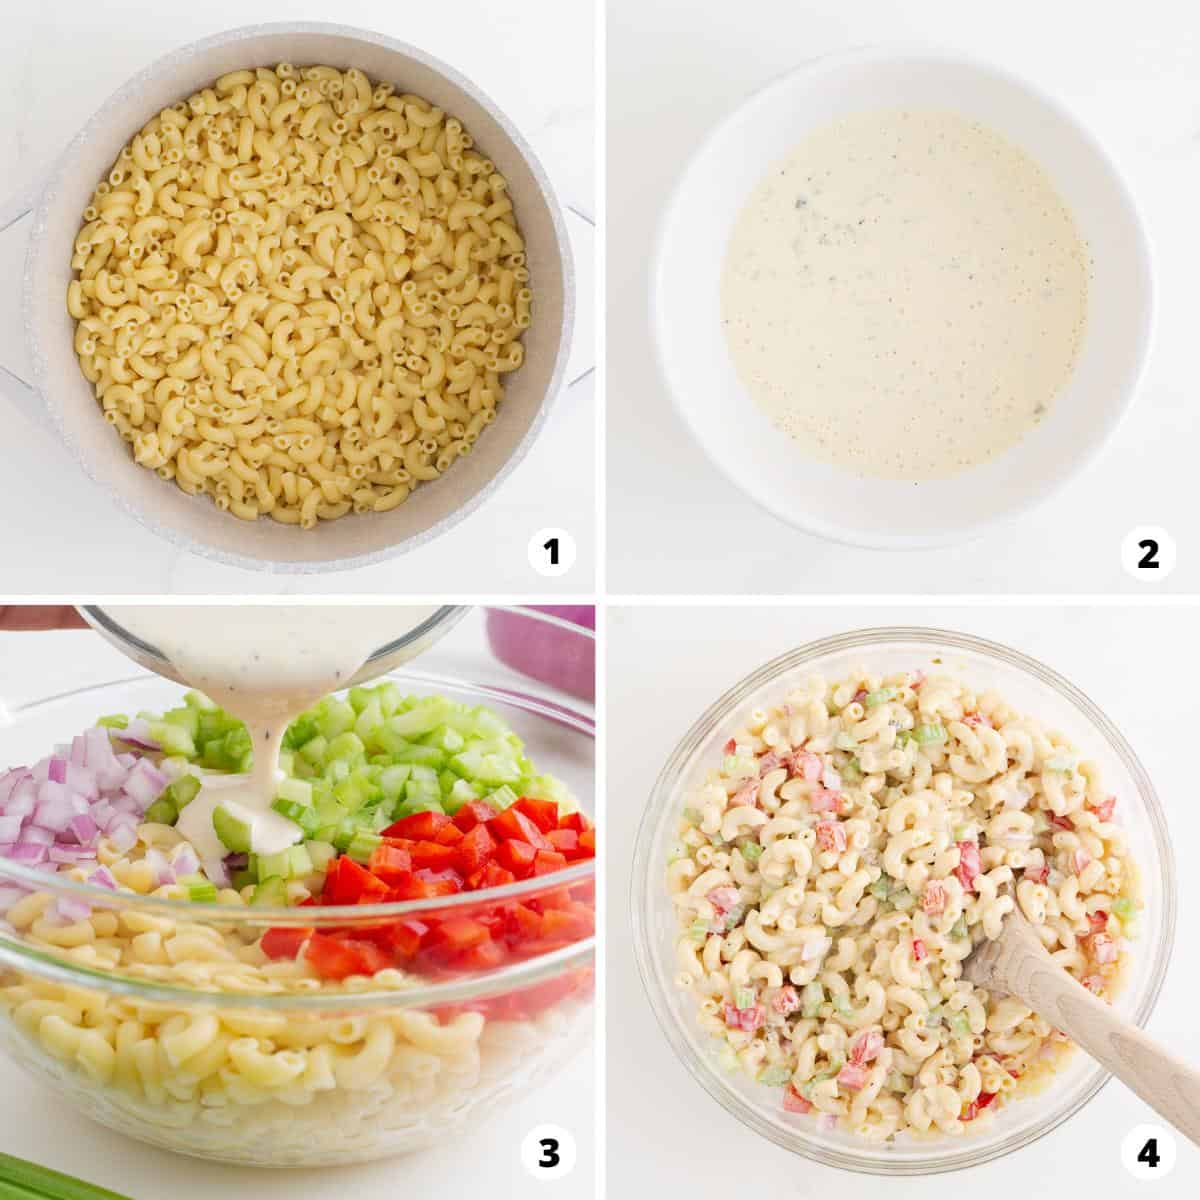 Showing how to make macaroni salad in a 4 step collage.